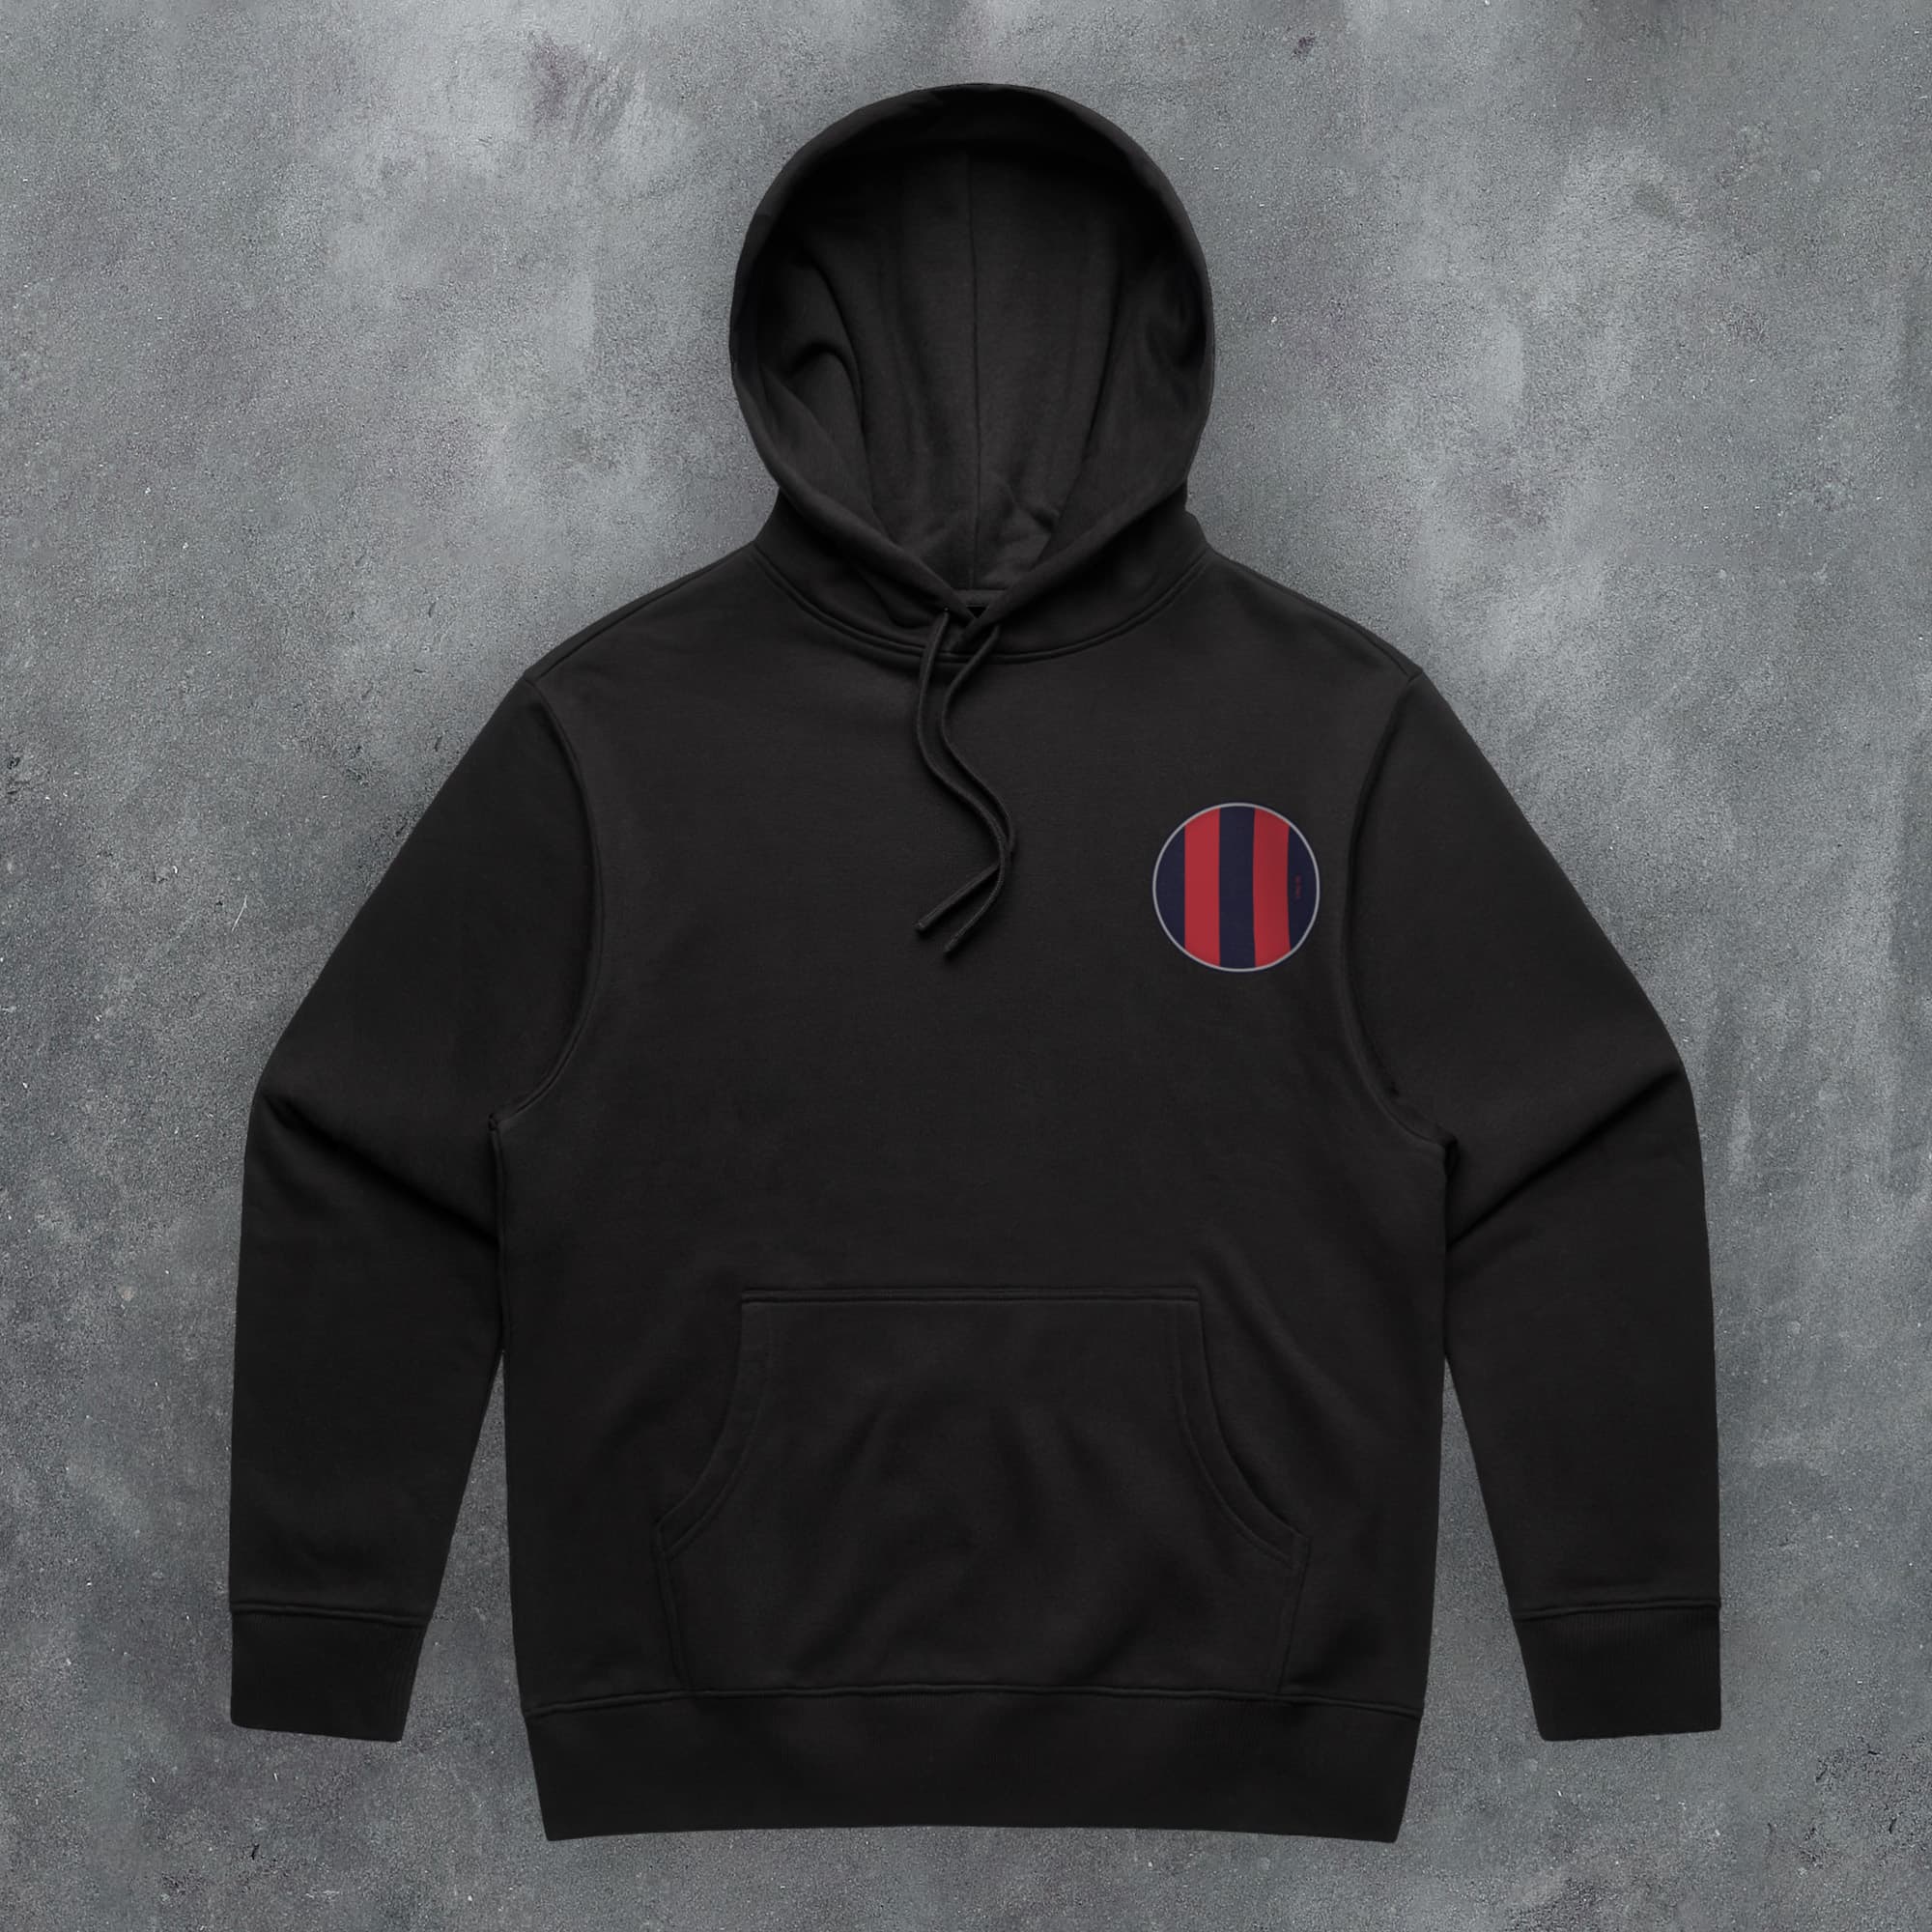 a black hoodie with a red and blue stripe on the chest